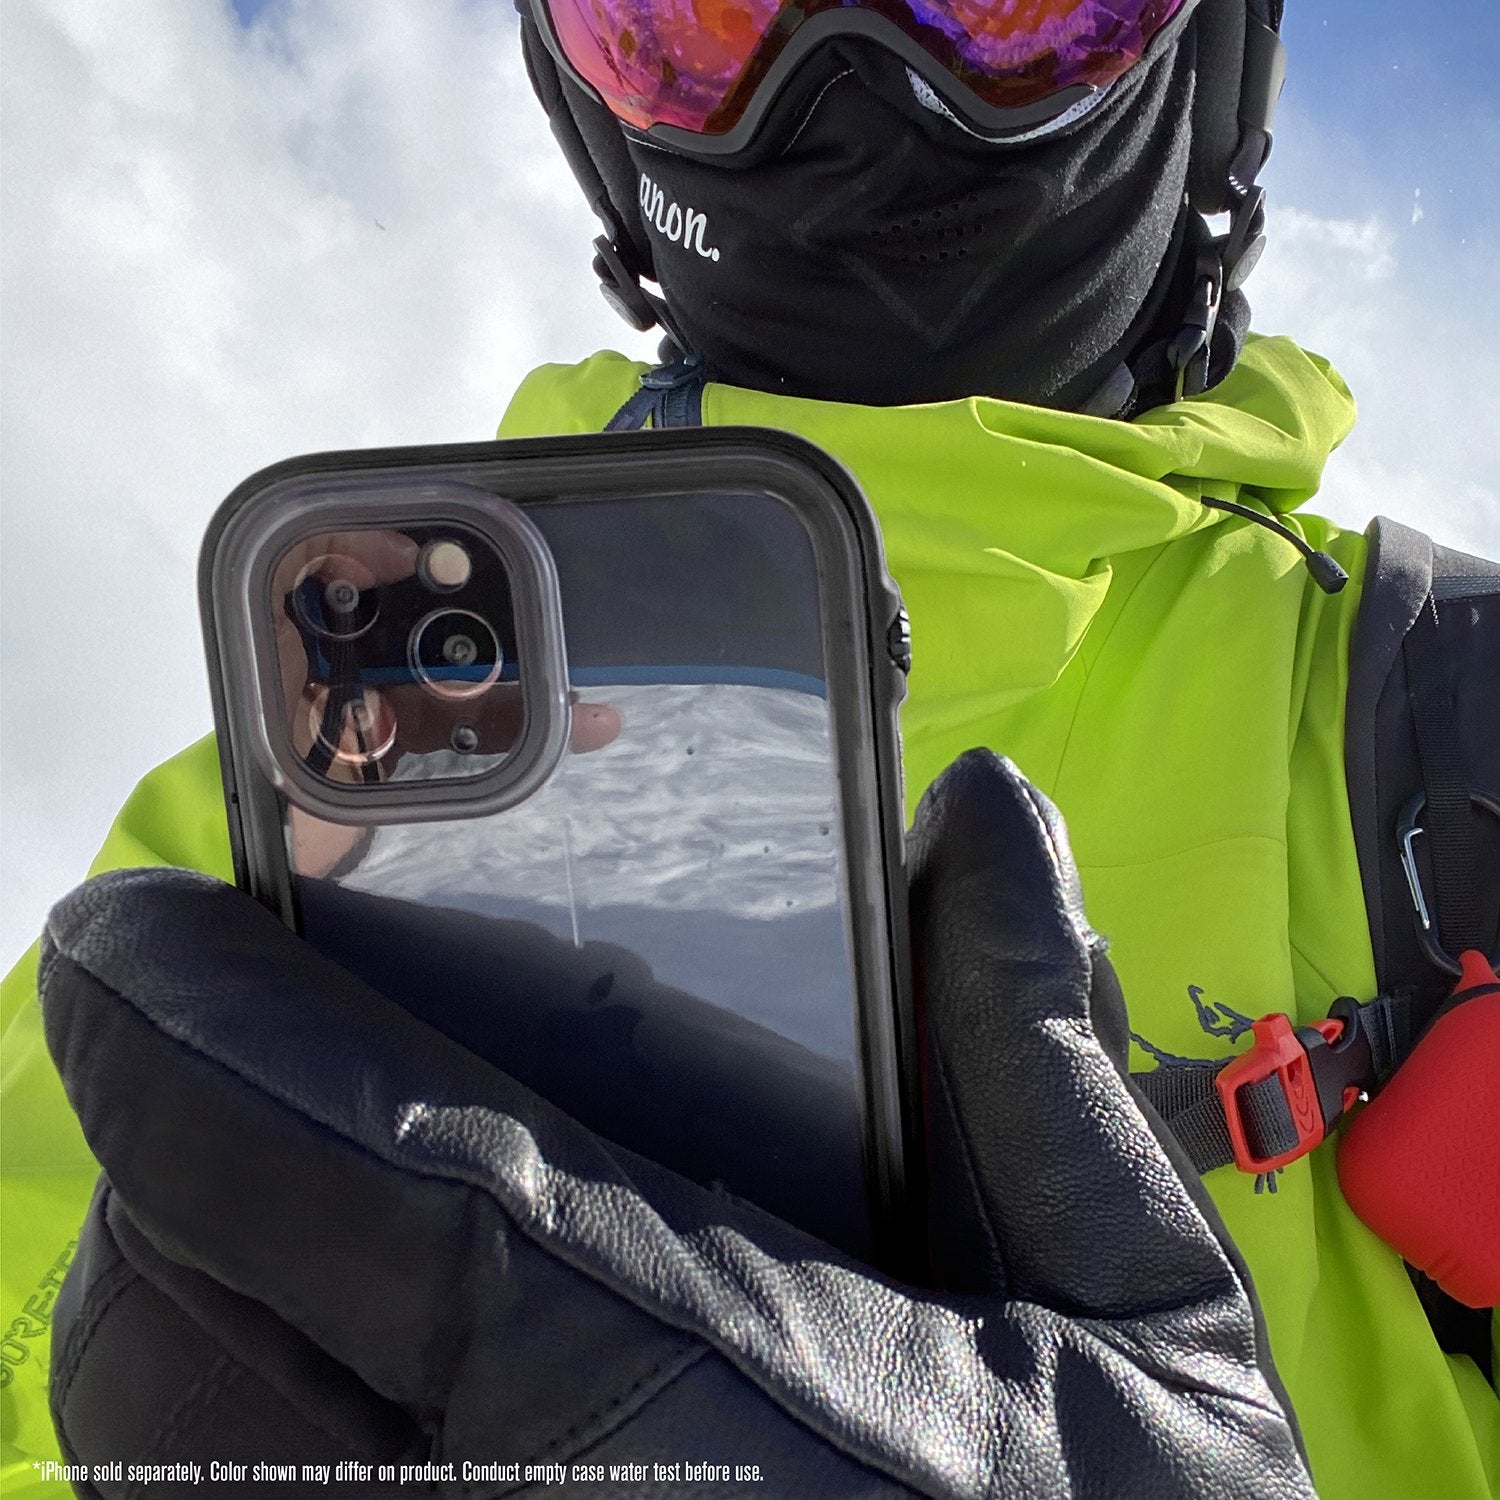 Catalyst iphone 11 pro max waterproof case showing the man holding the phone with case in stealth black colorway